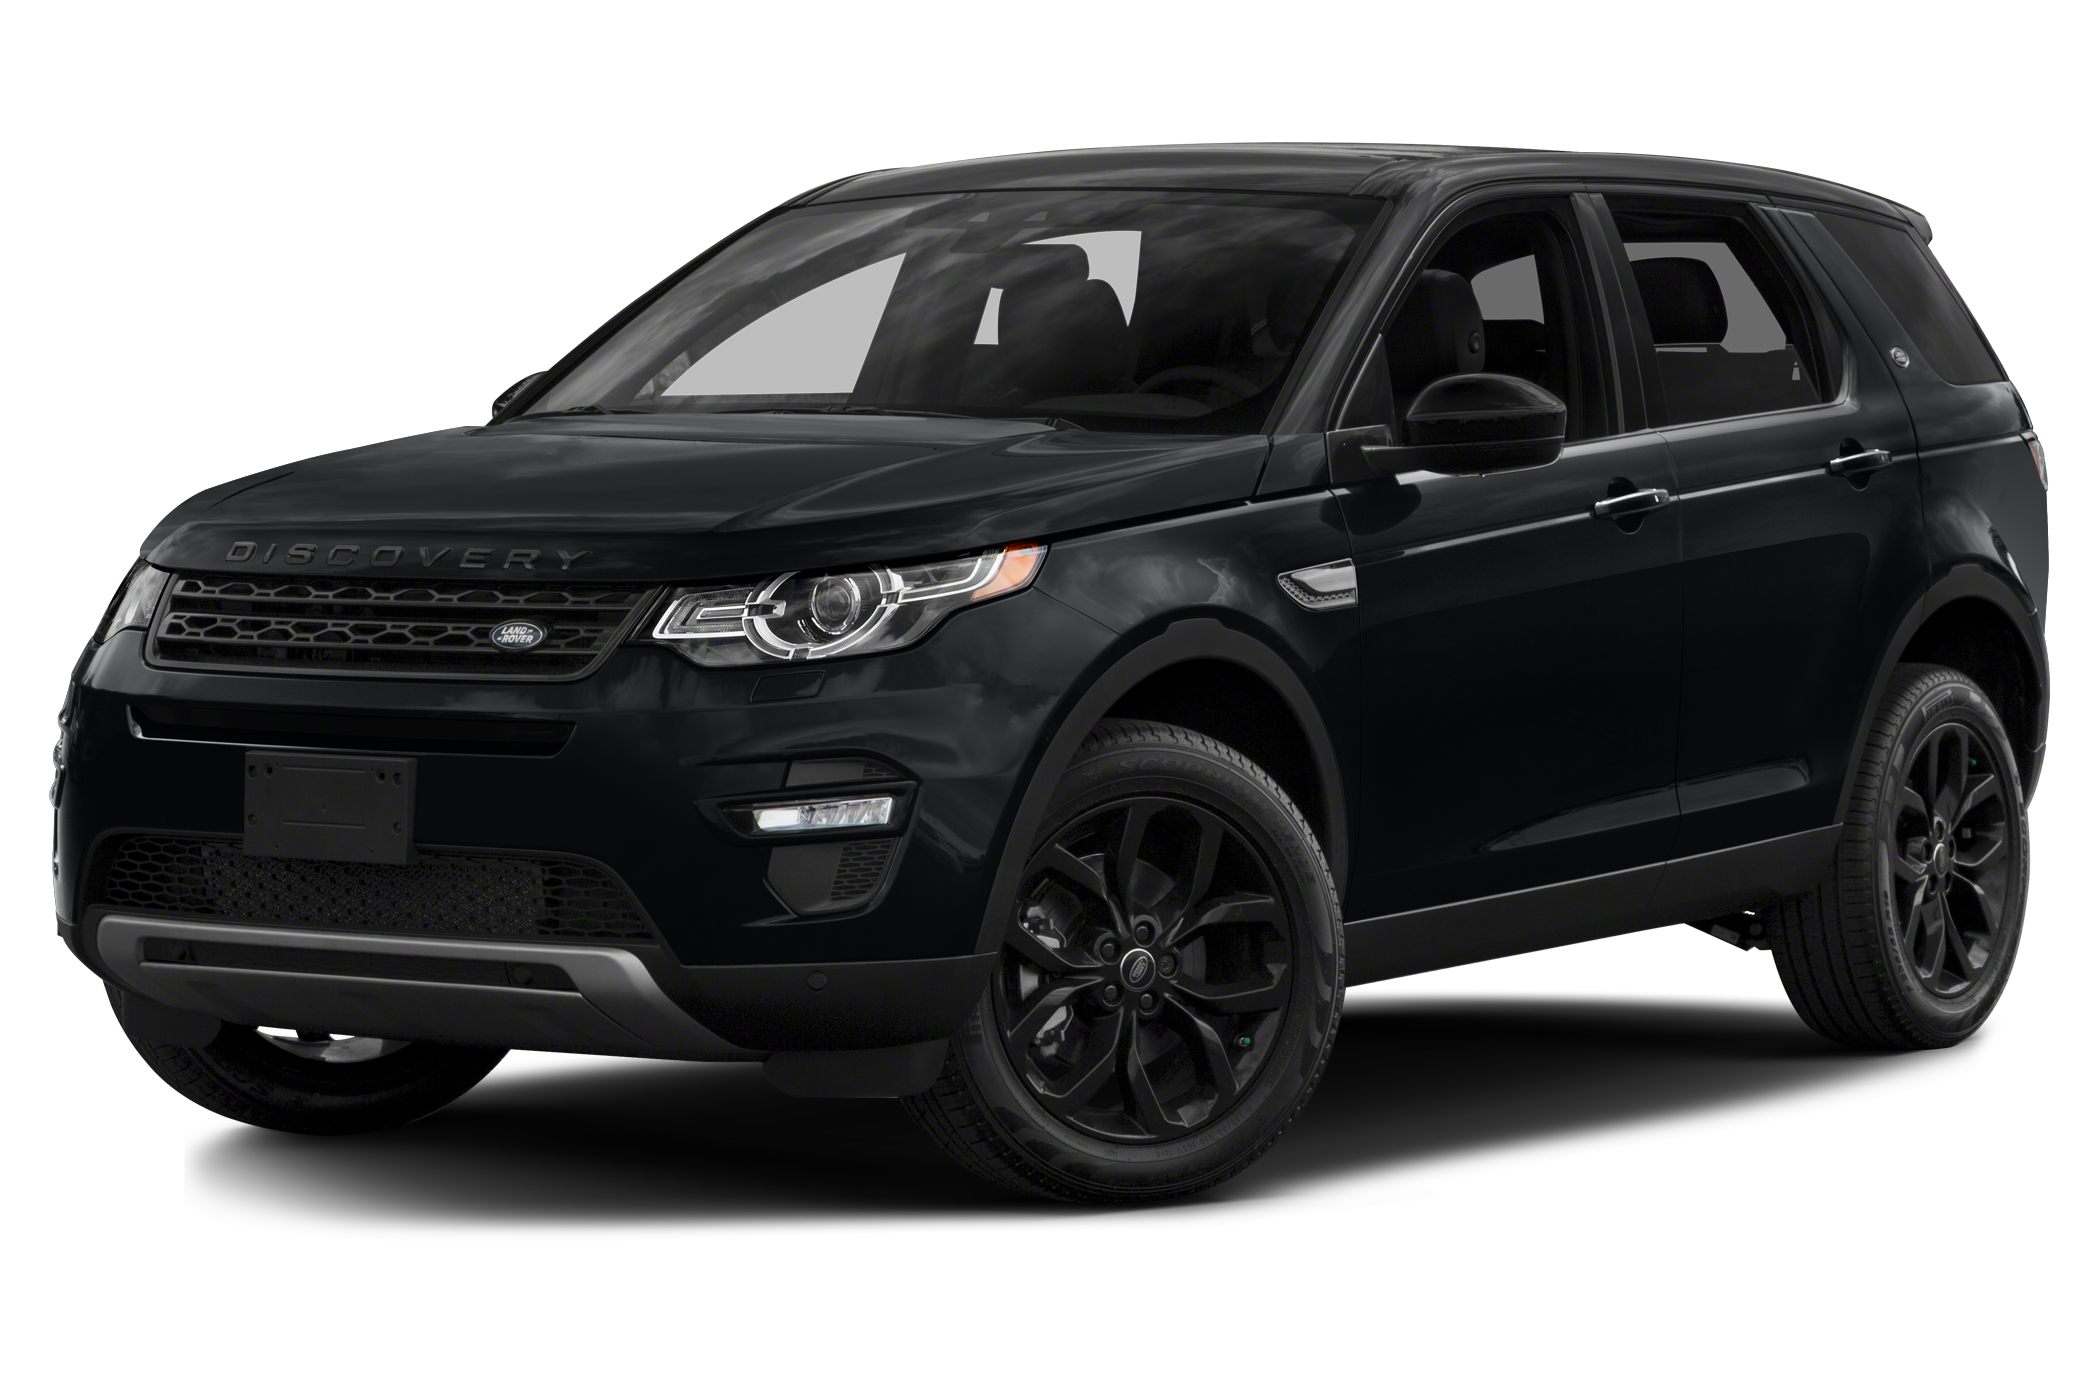 Landrover Discovery 2017